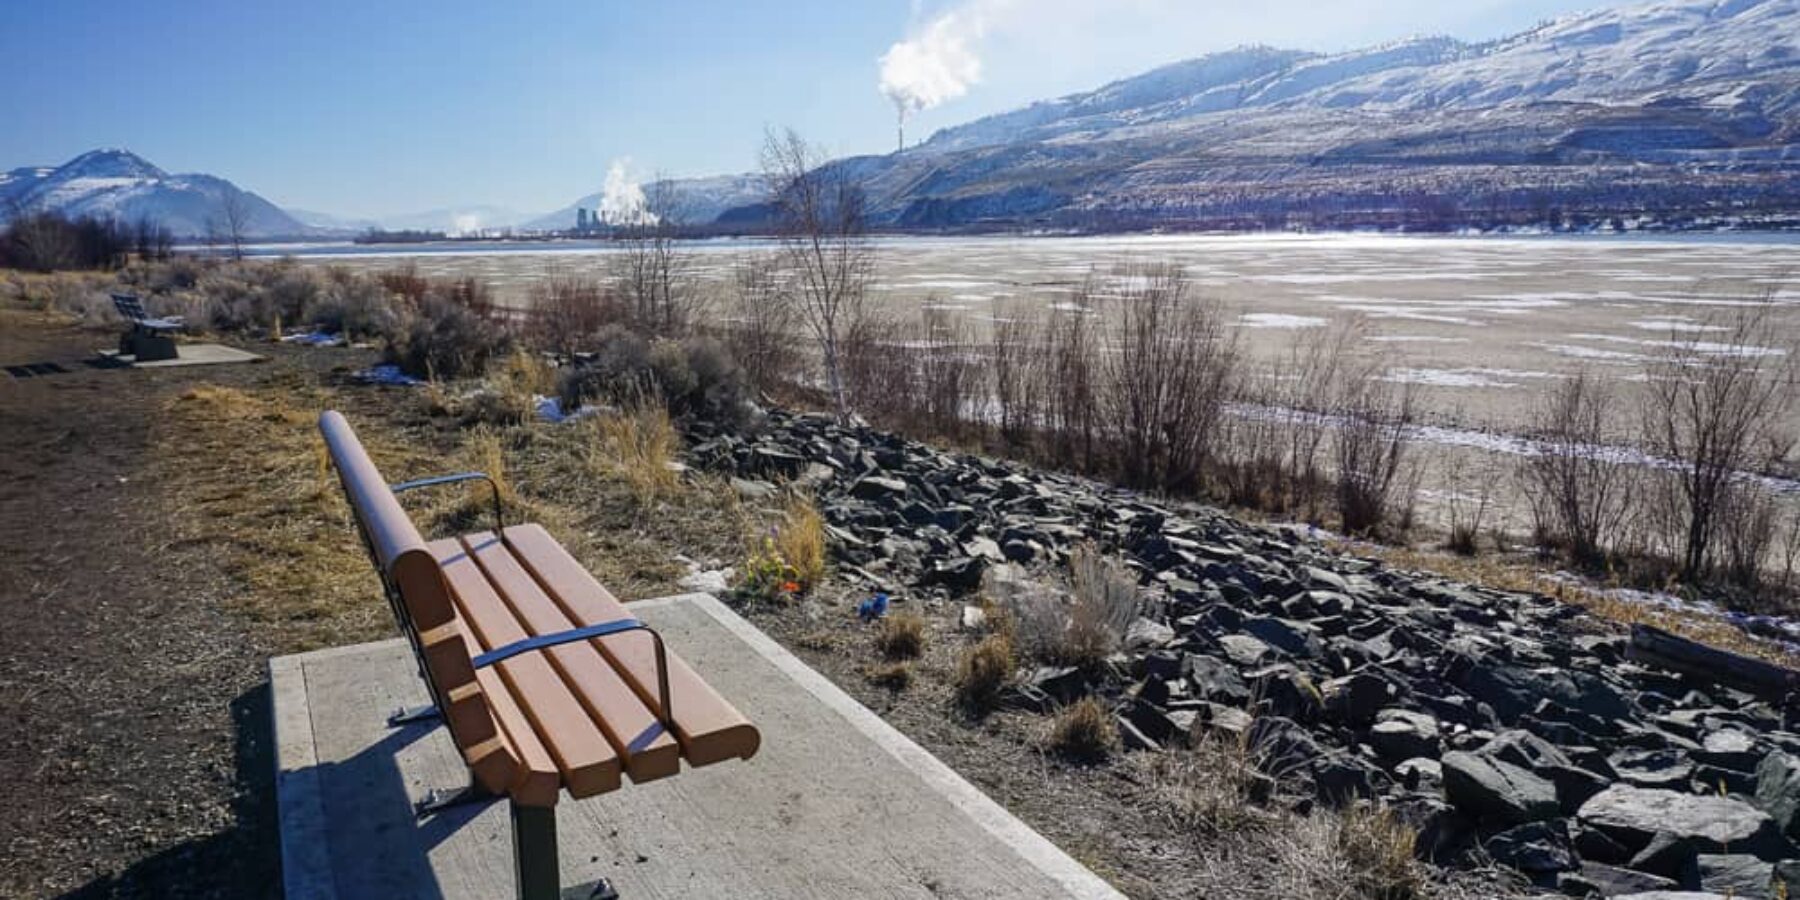 Kamloops Trails that remain open during COVID-19